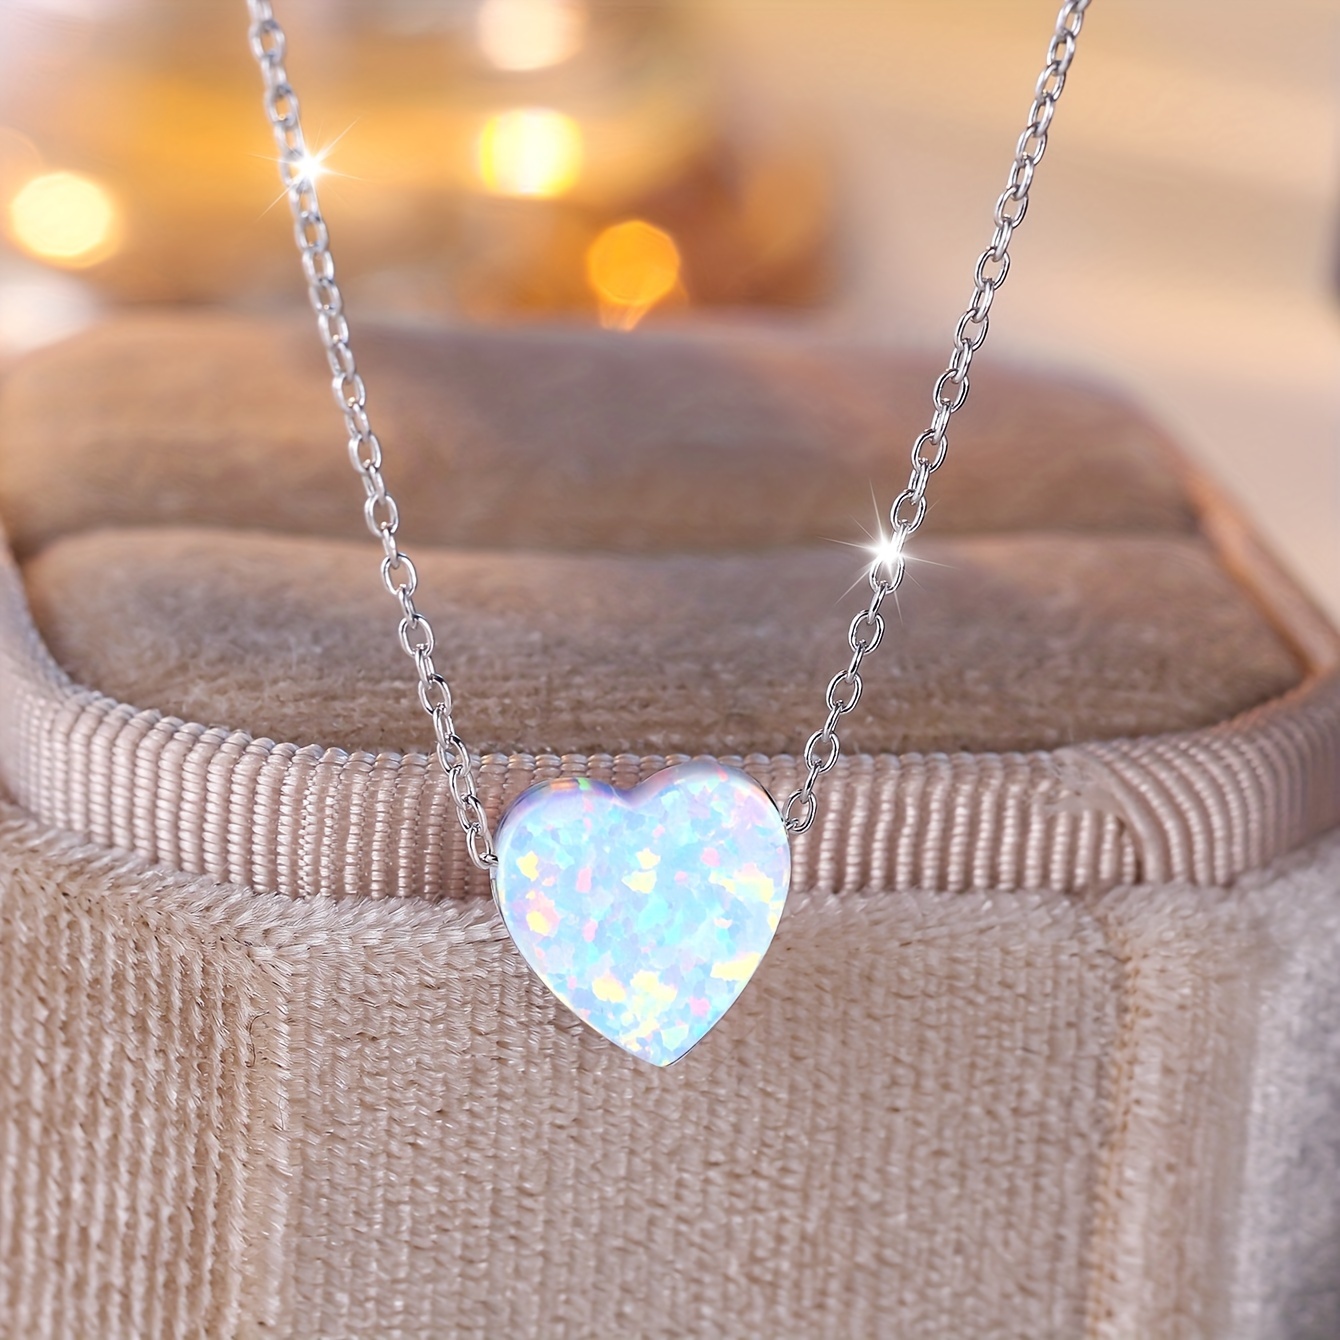 Cute Gold or Silver Heart Necklace for Sale